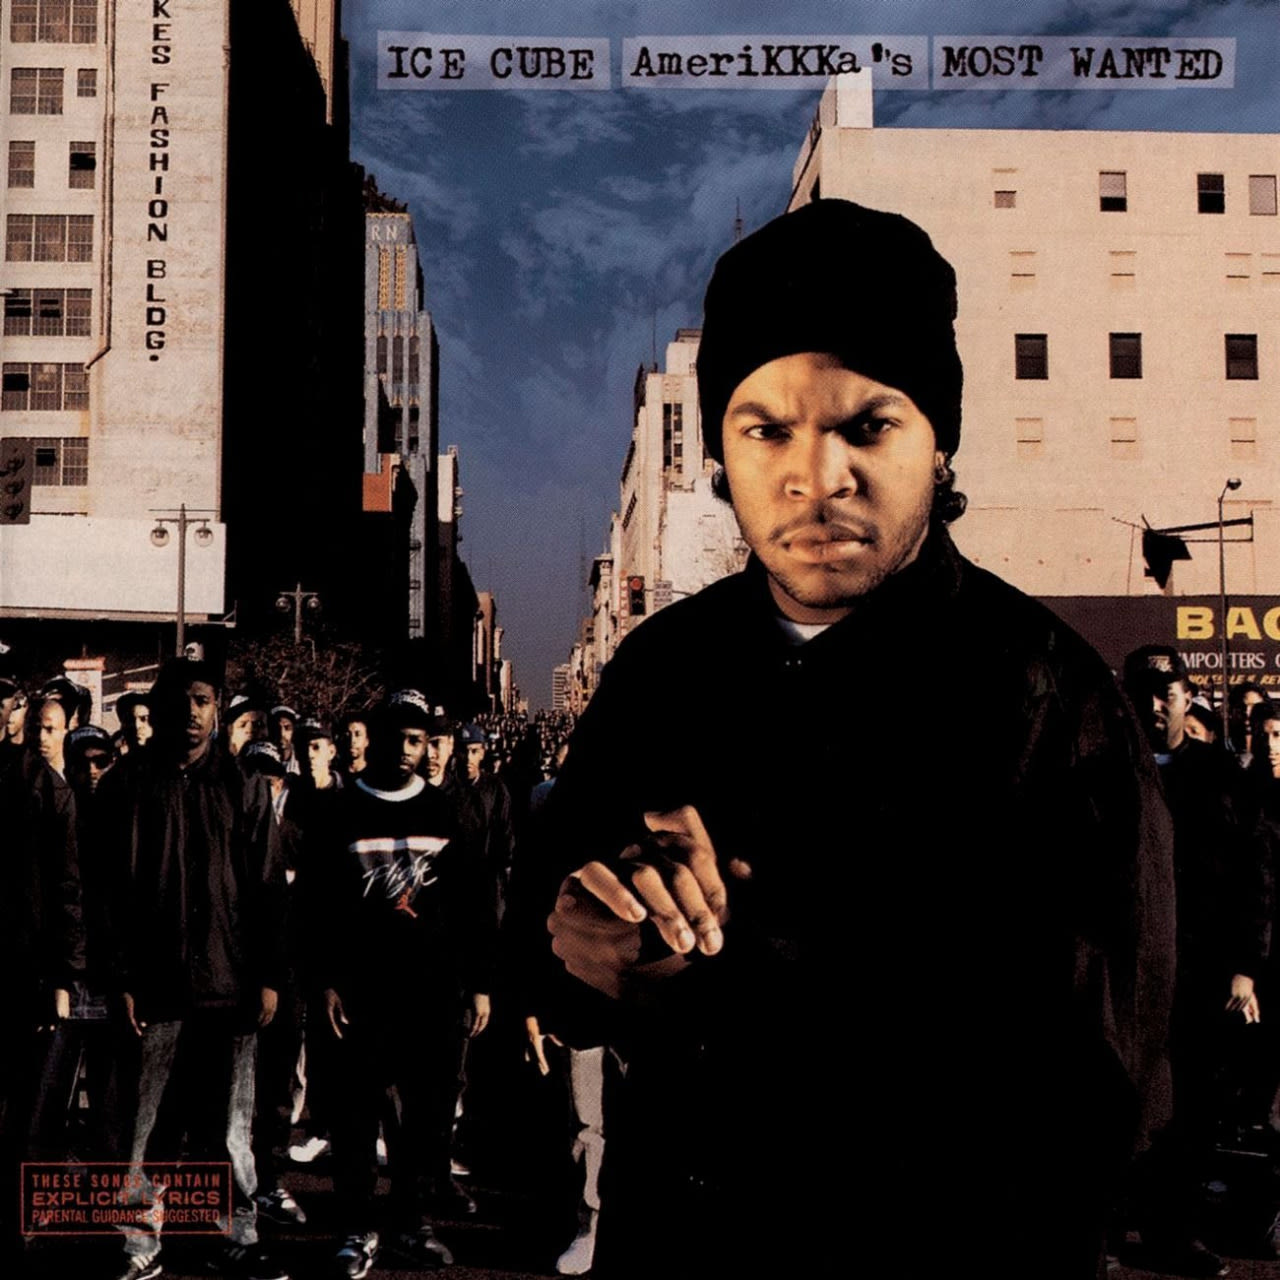 The Source |Today in Hip-Hop History: Ice Cube Dropped His First Solo LP 'Amerikkka's Most Wanted' 34 Years Ago